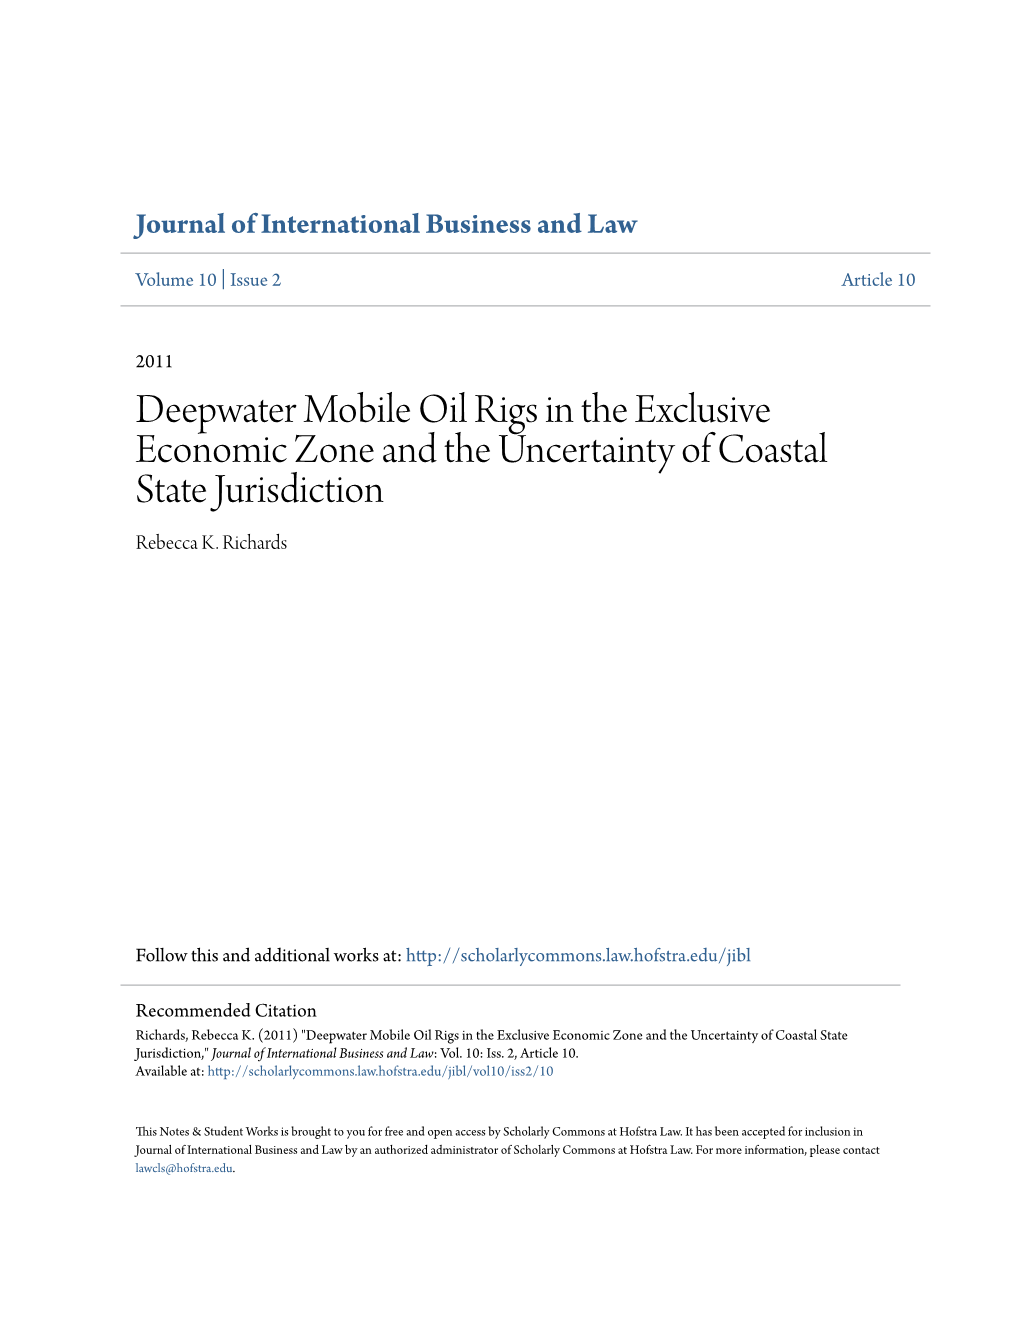 Deepwater Mobile Oil Rigs in the Exclusive Economic Zone and the Uncertainty of Coastal State Jurisdiction Rebecca K